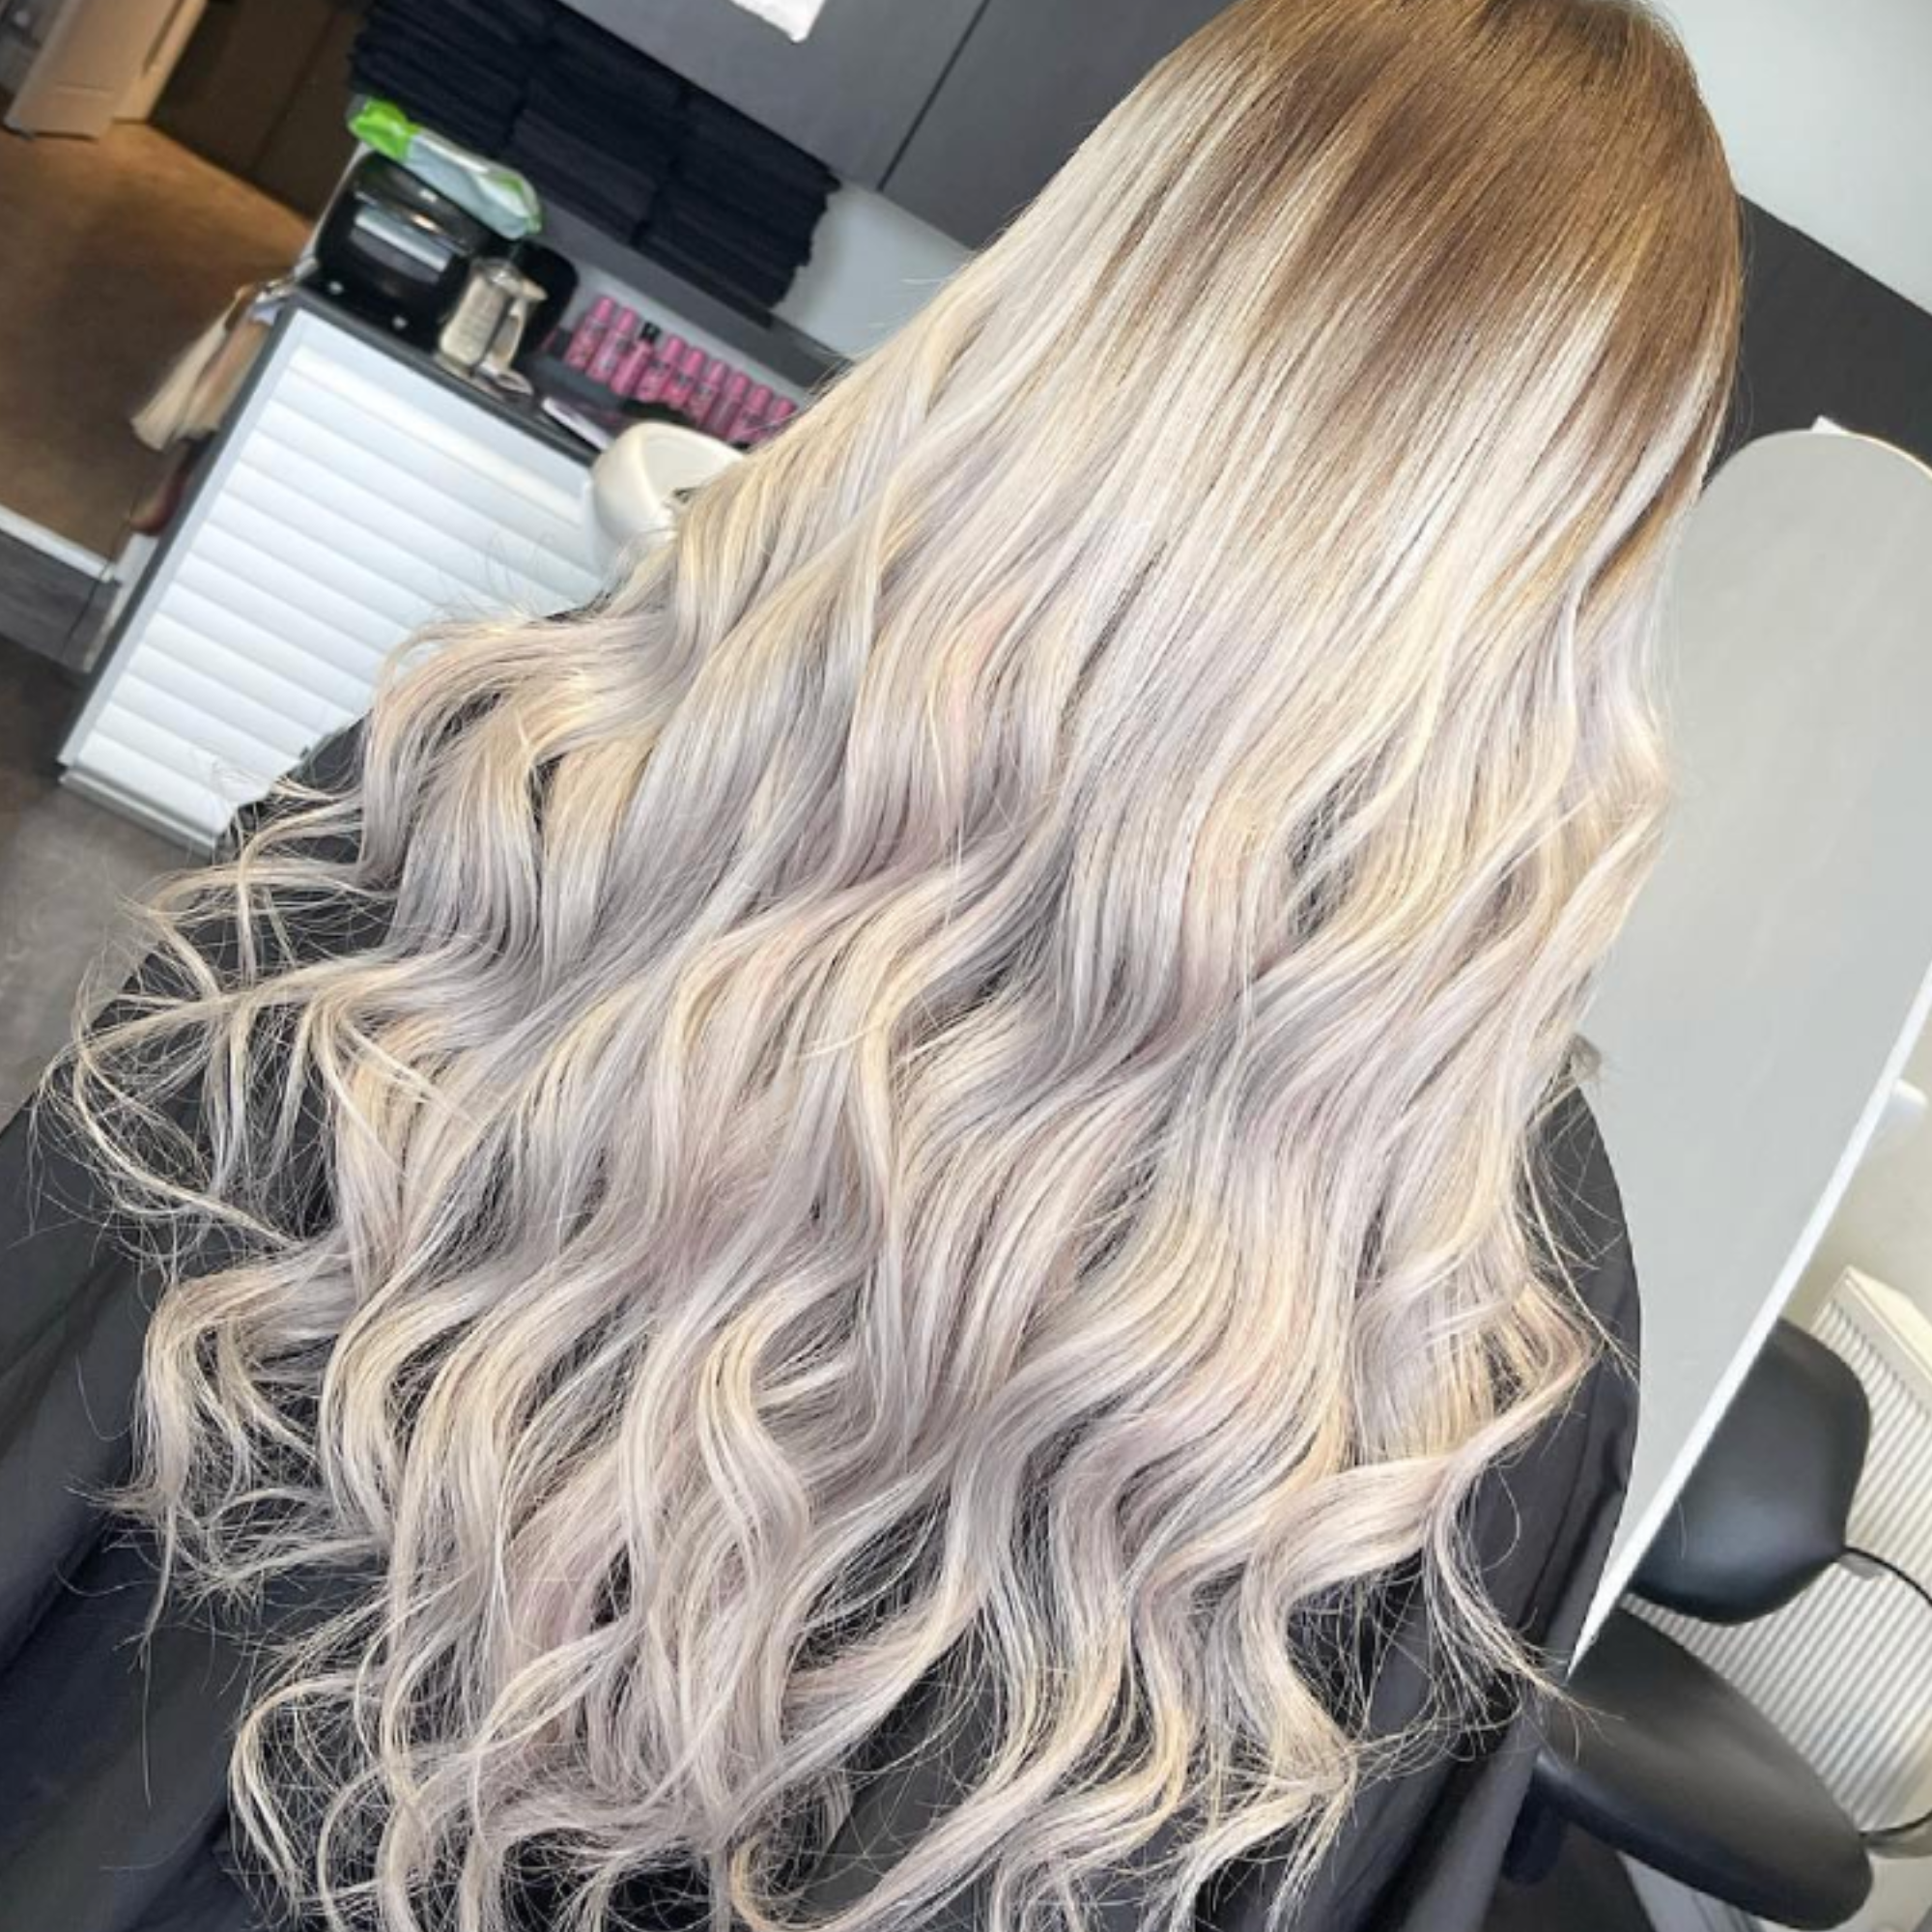 "hair rehab london 18" weft hair extensions shade swatch titled rooted blonde af"